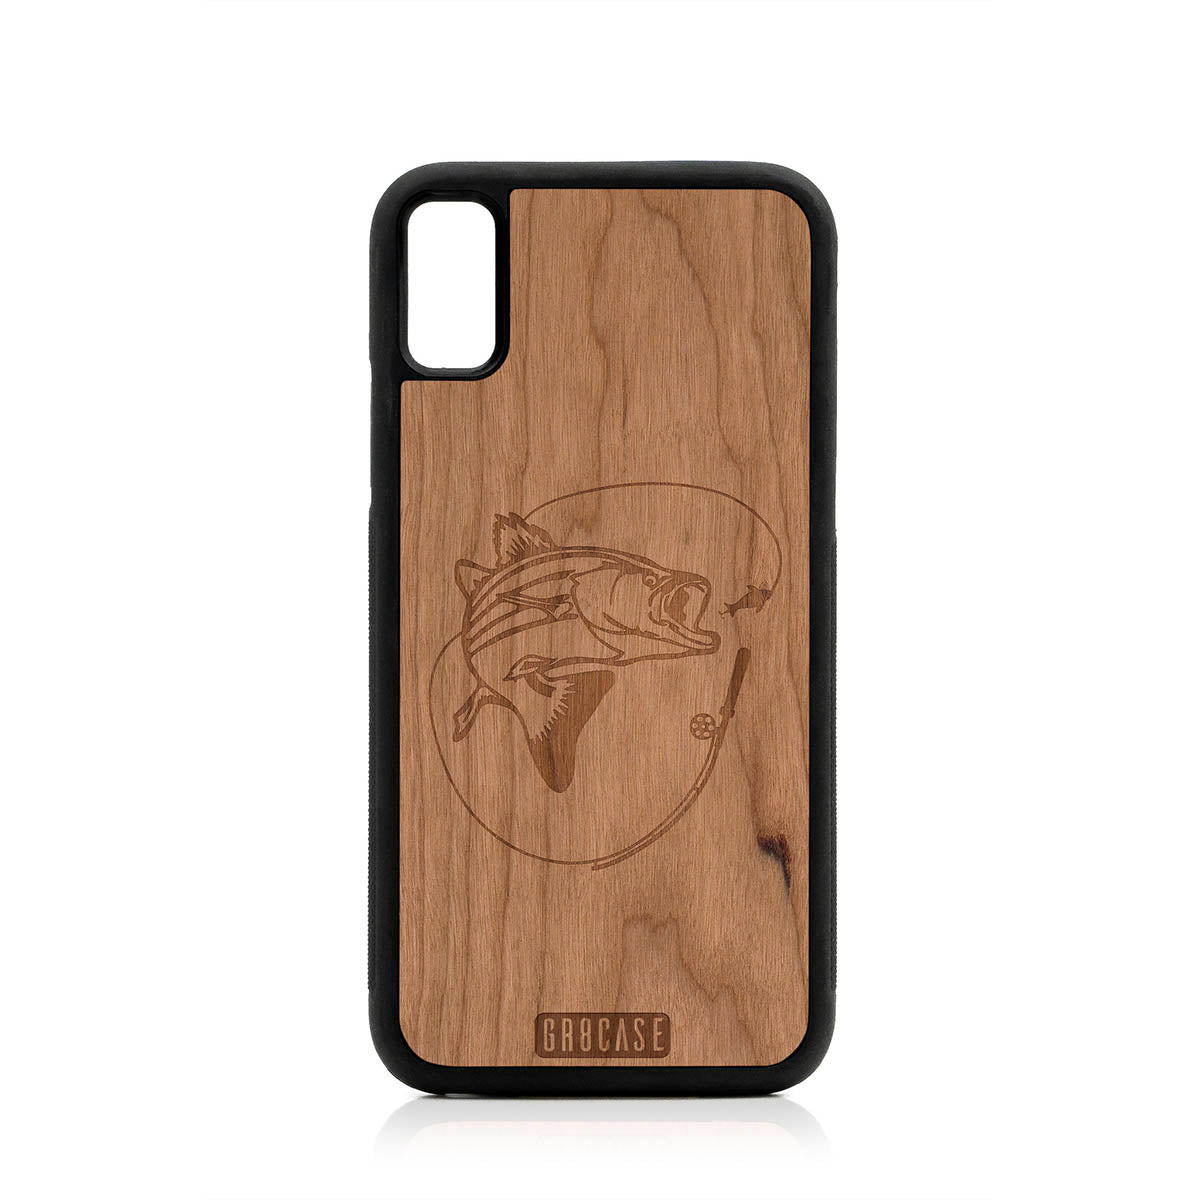 Fish and Reel Design Wood Case For iPhone XR by GR8CASE